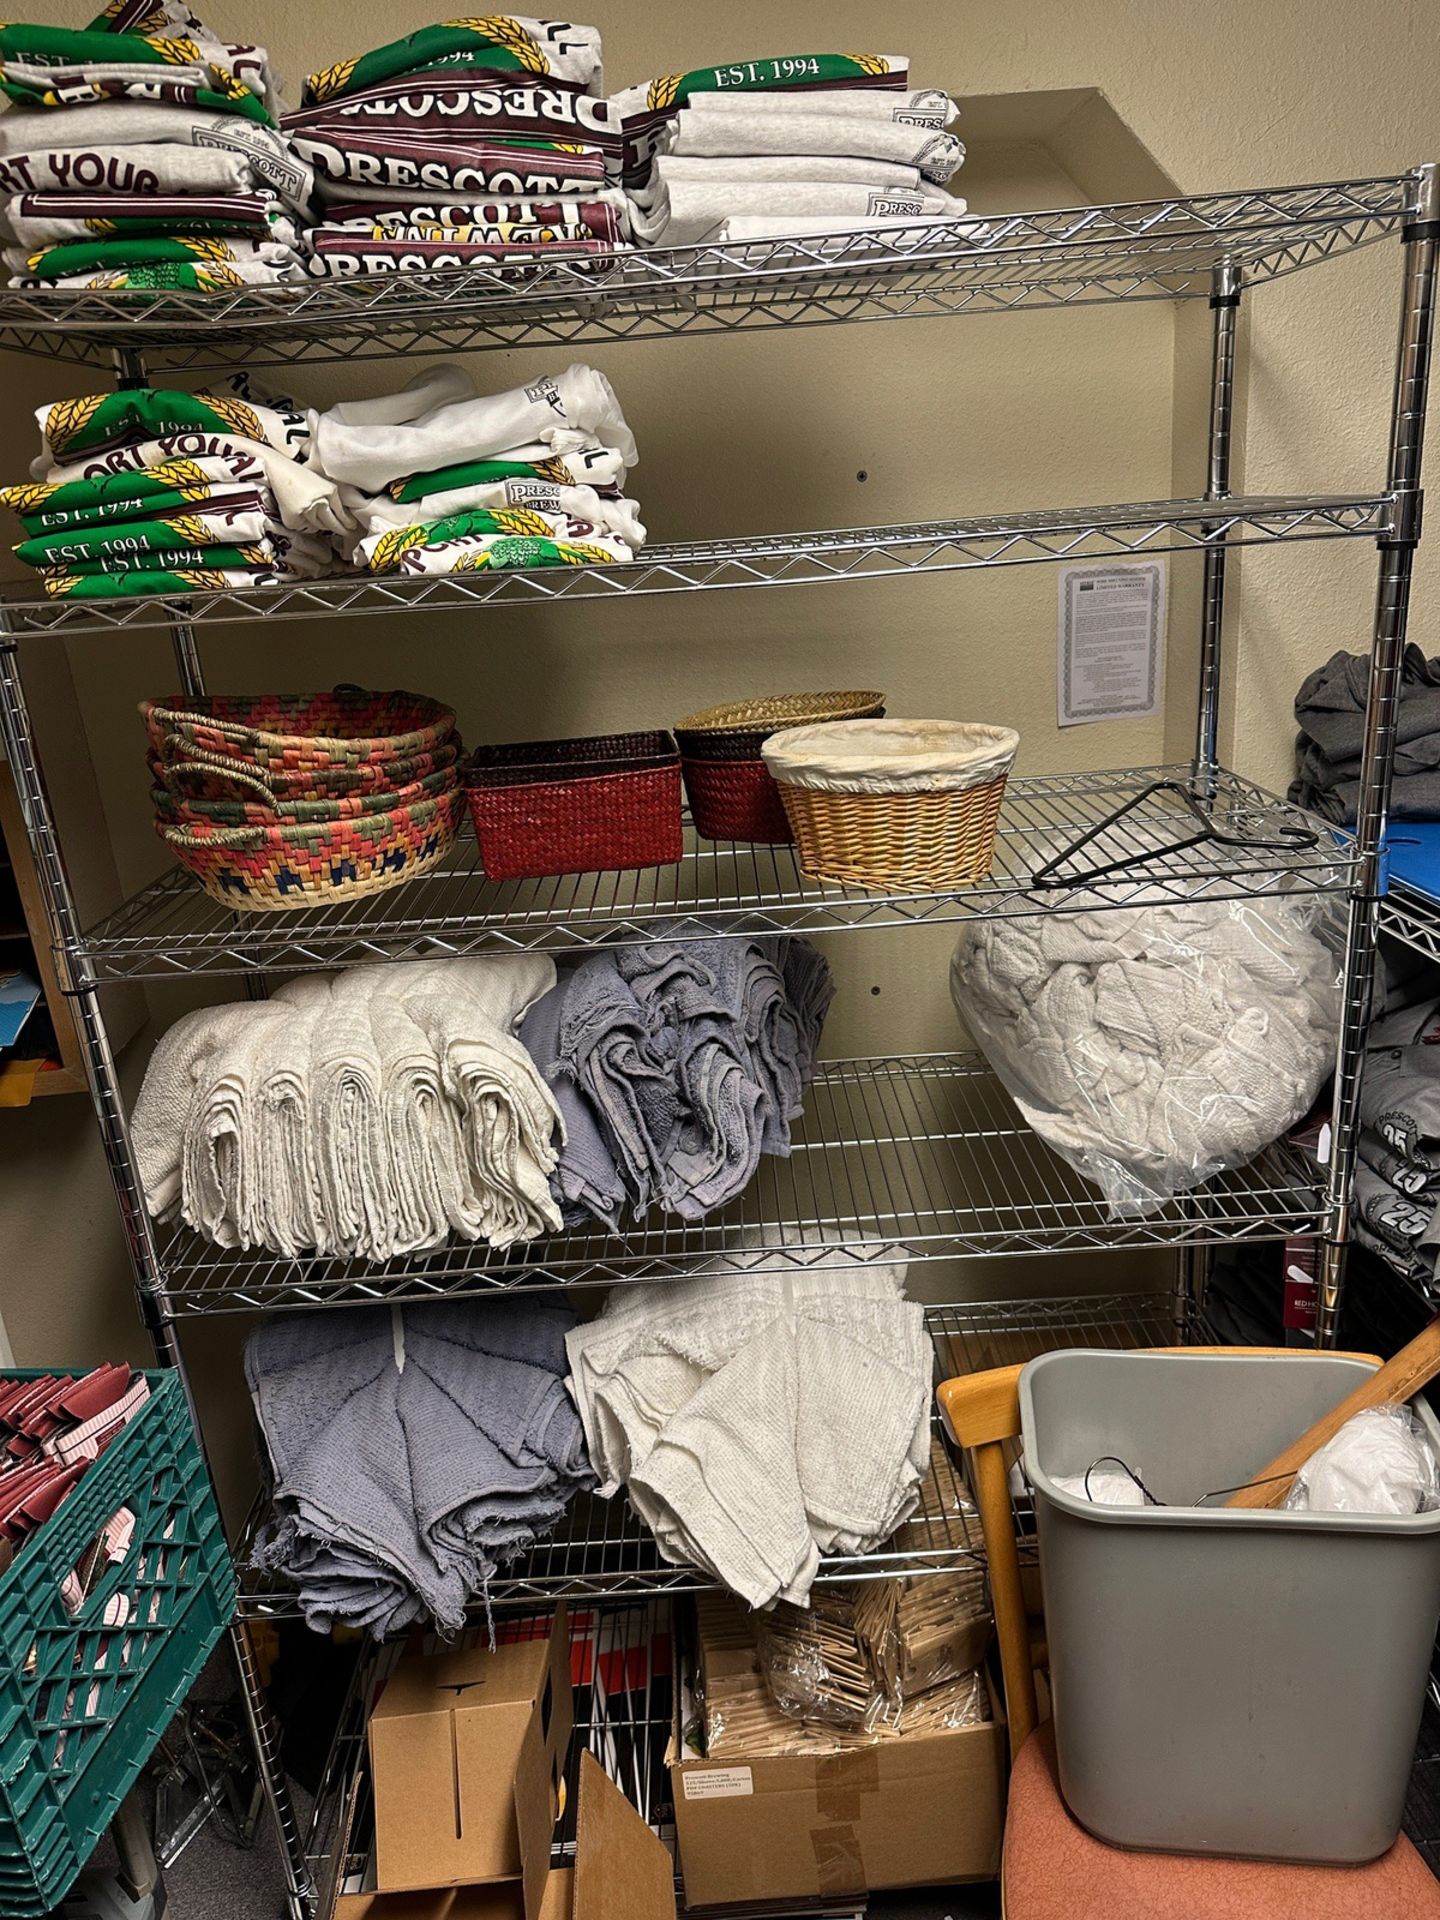 Lot of Contents of Merchandise Room - Including Shelving, Glassware, - Subj to Bulk | Rig Fee $125 - Image 6 of 8